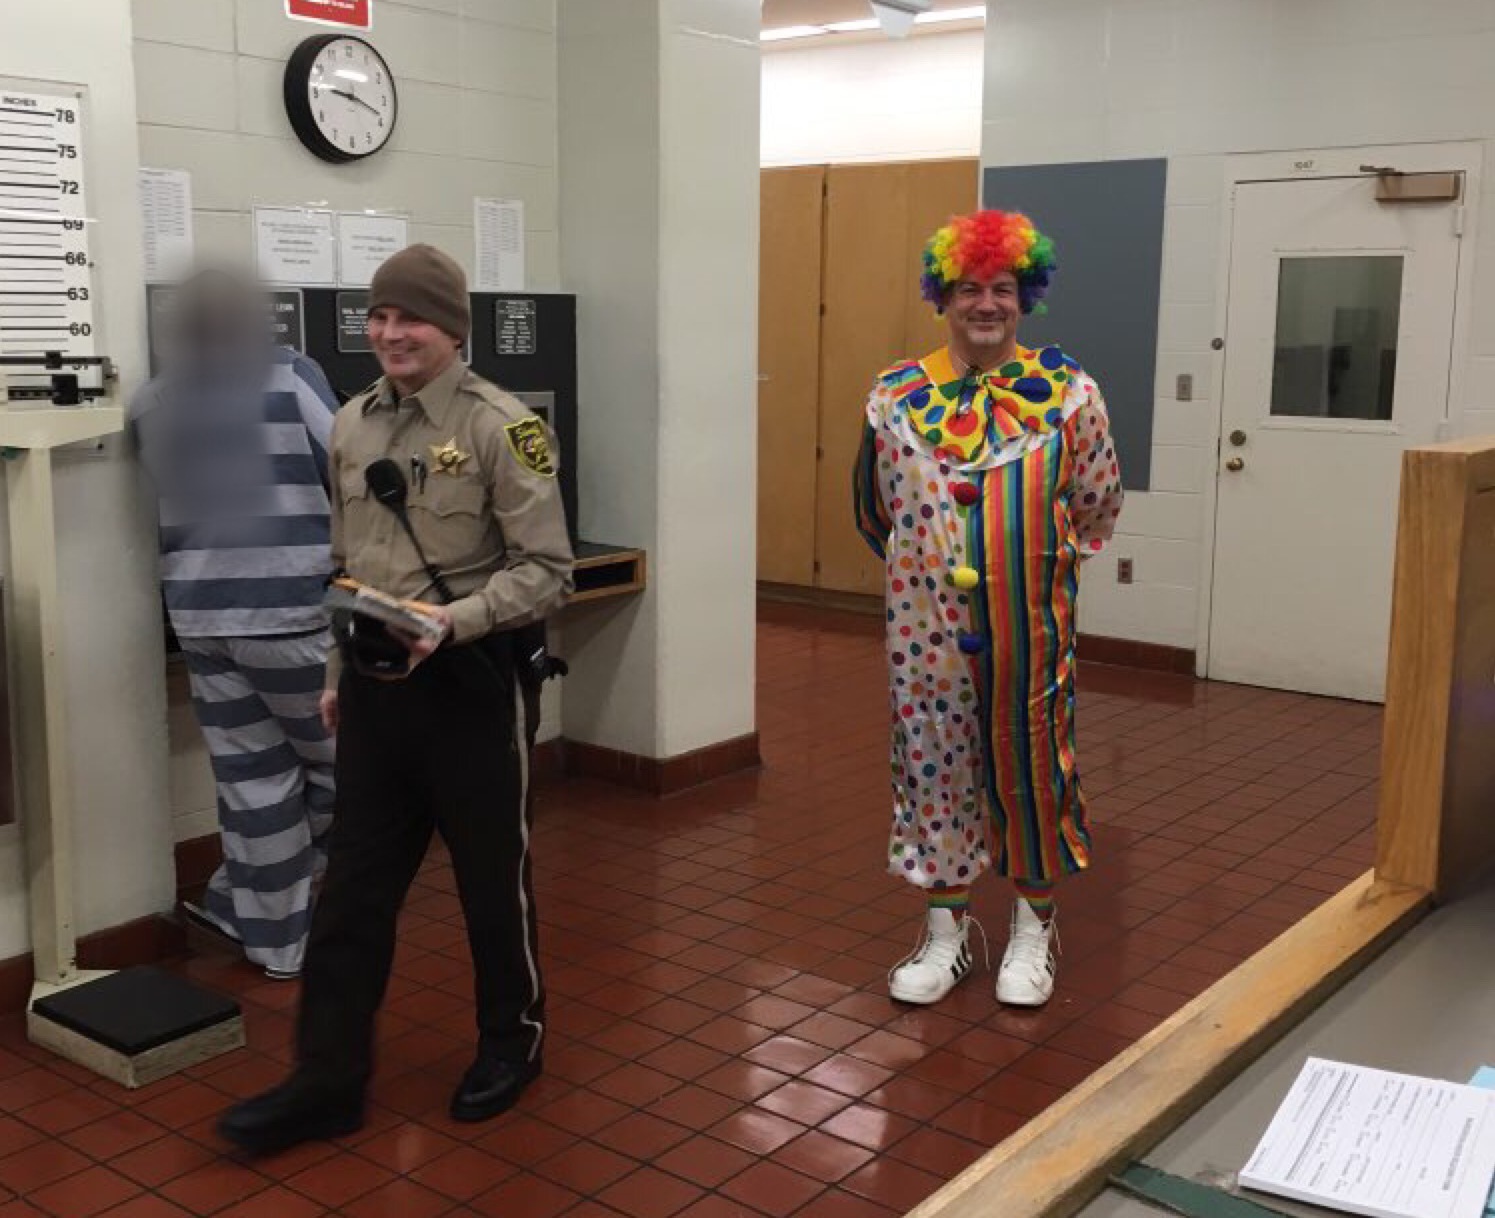 It's not a joke, clown charged with DUI in Clay